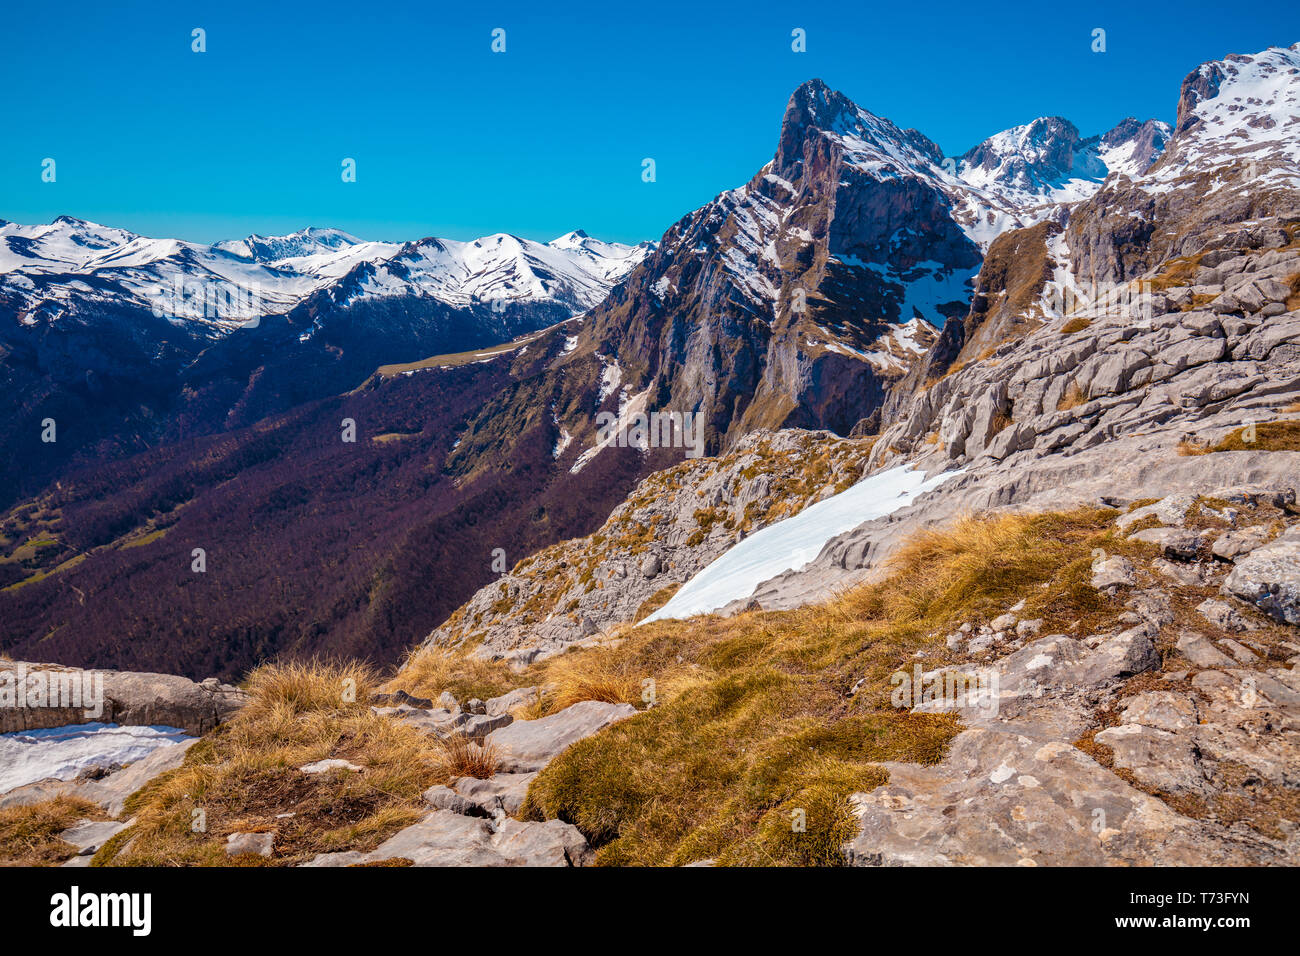 Mountain range, covered with snow. National park Peaks of Europe (Picos de Europa). Cantabria, Spain, Europe Stock Photo